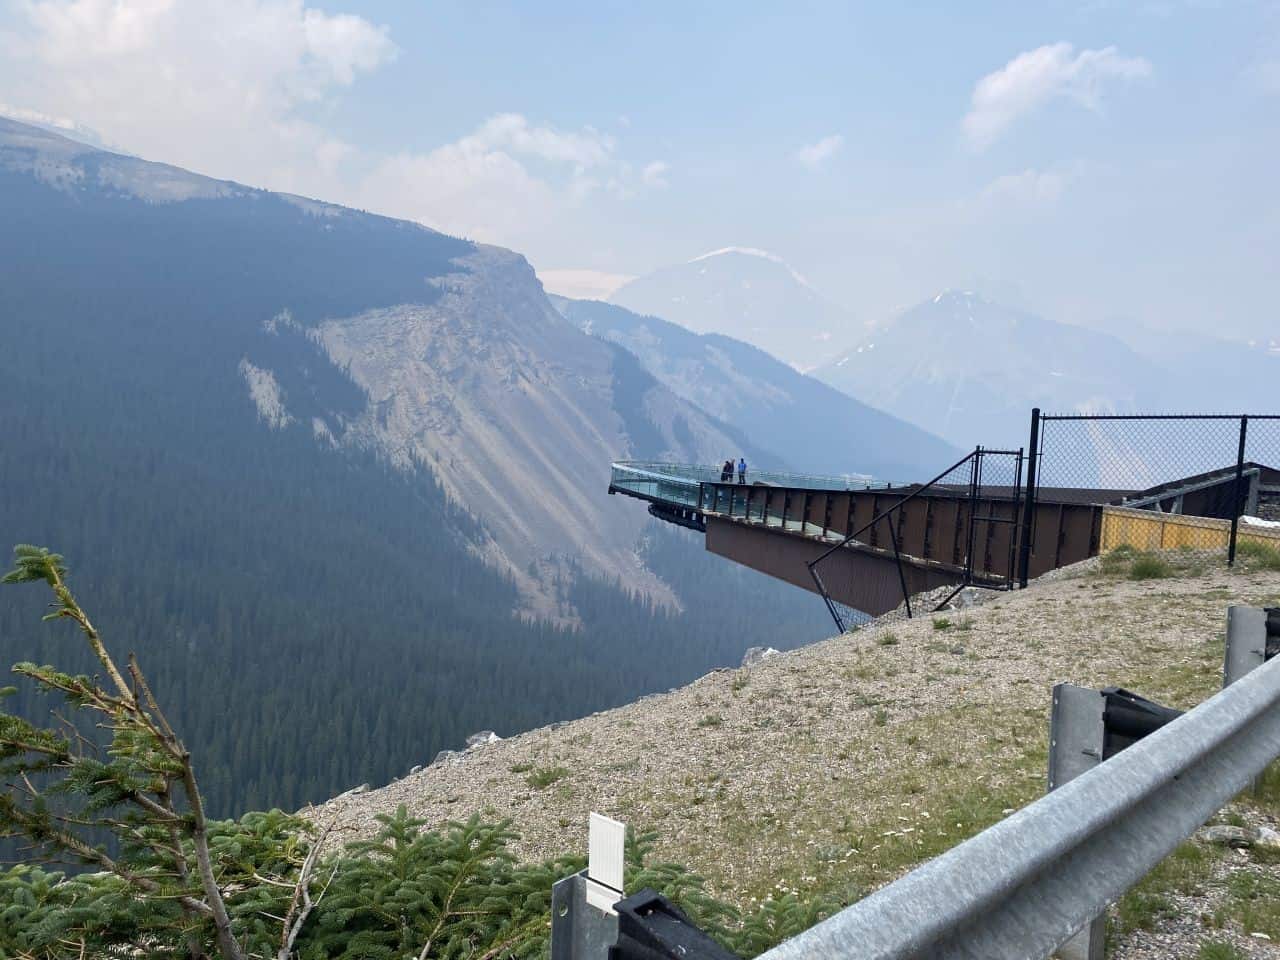 The Columbian Icefields Skywalk in Jasper National Park , Alberta, Canada is 1 km long interpretive trail with a glass bottom walkway that extends out over the valley 280m below. This is one of the top attractions in the Canadian Rocky Mountains.